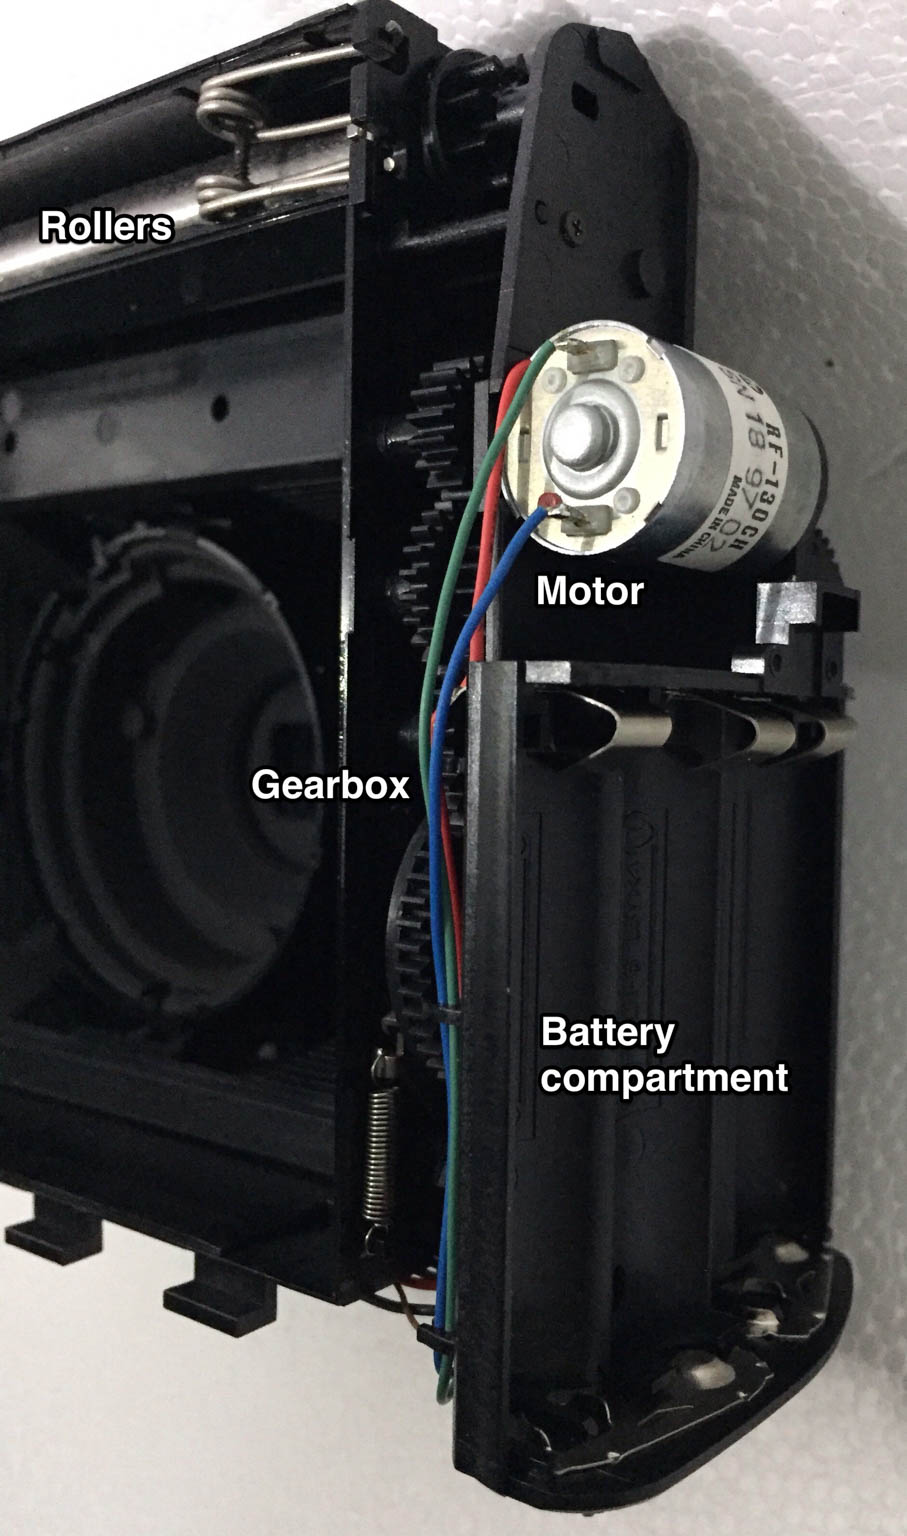 Instax Wide 100 motor gearbox battery compartment